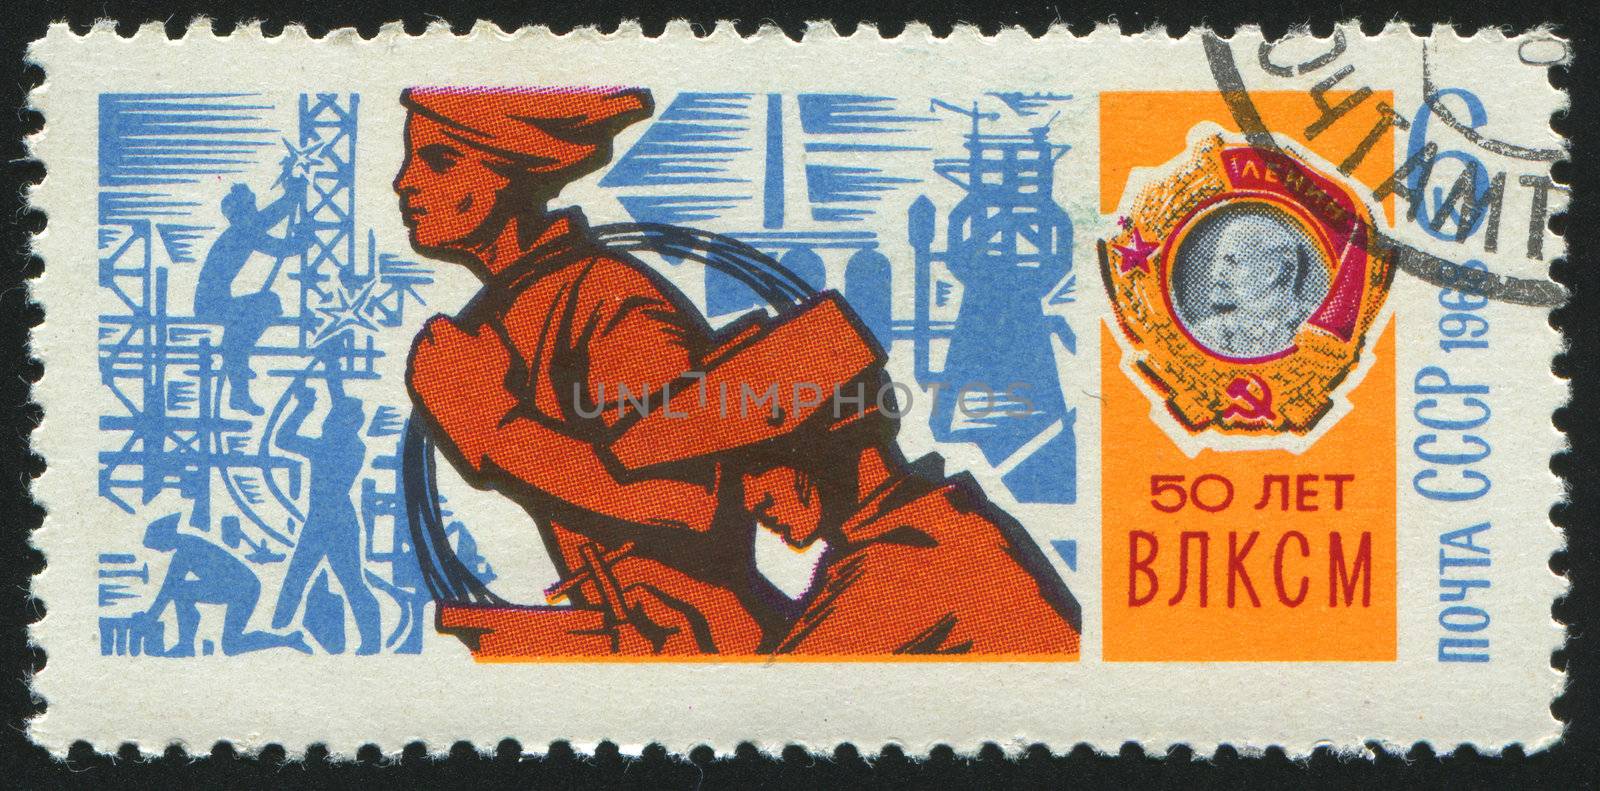 RUSSIA - CIRCA 1968: stamp printed by Russia, shows young workers, circa 1968.